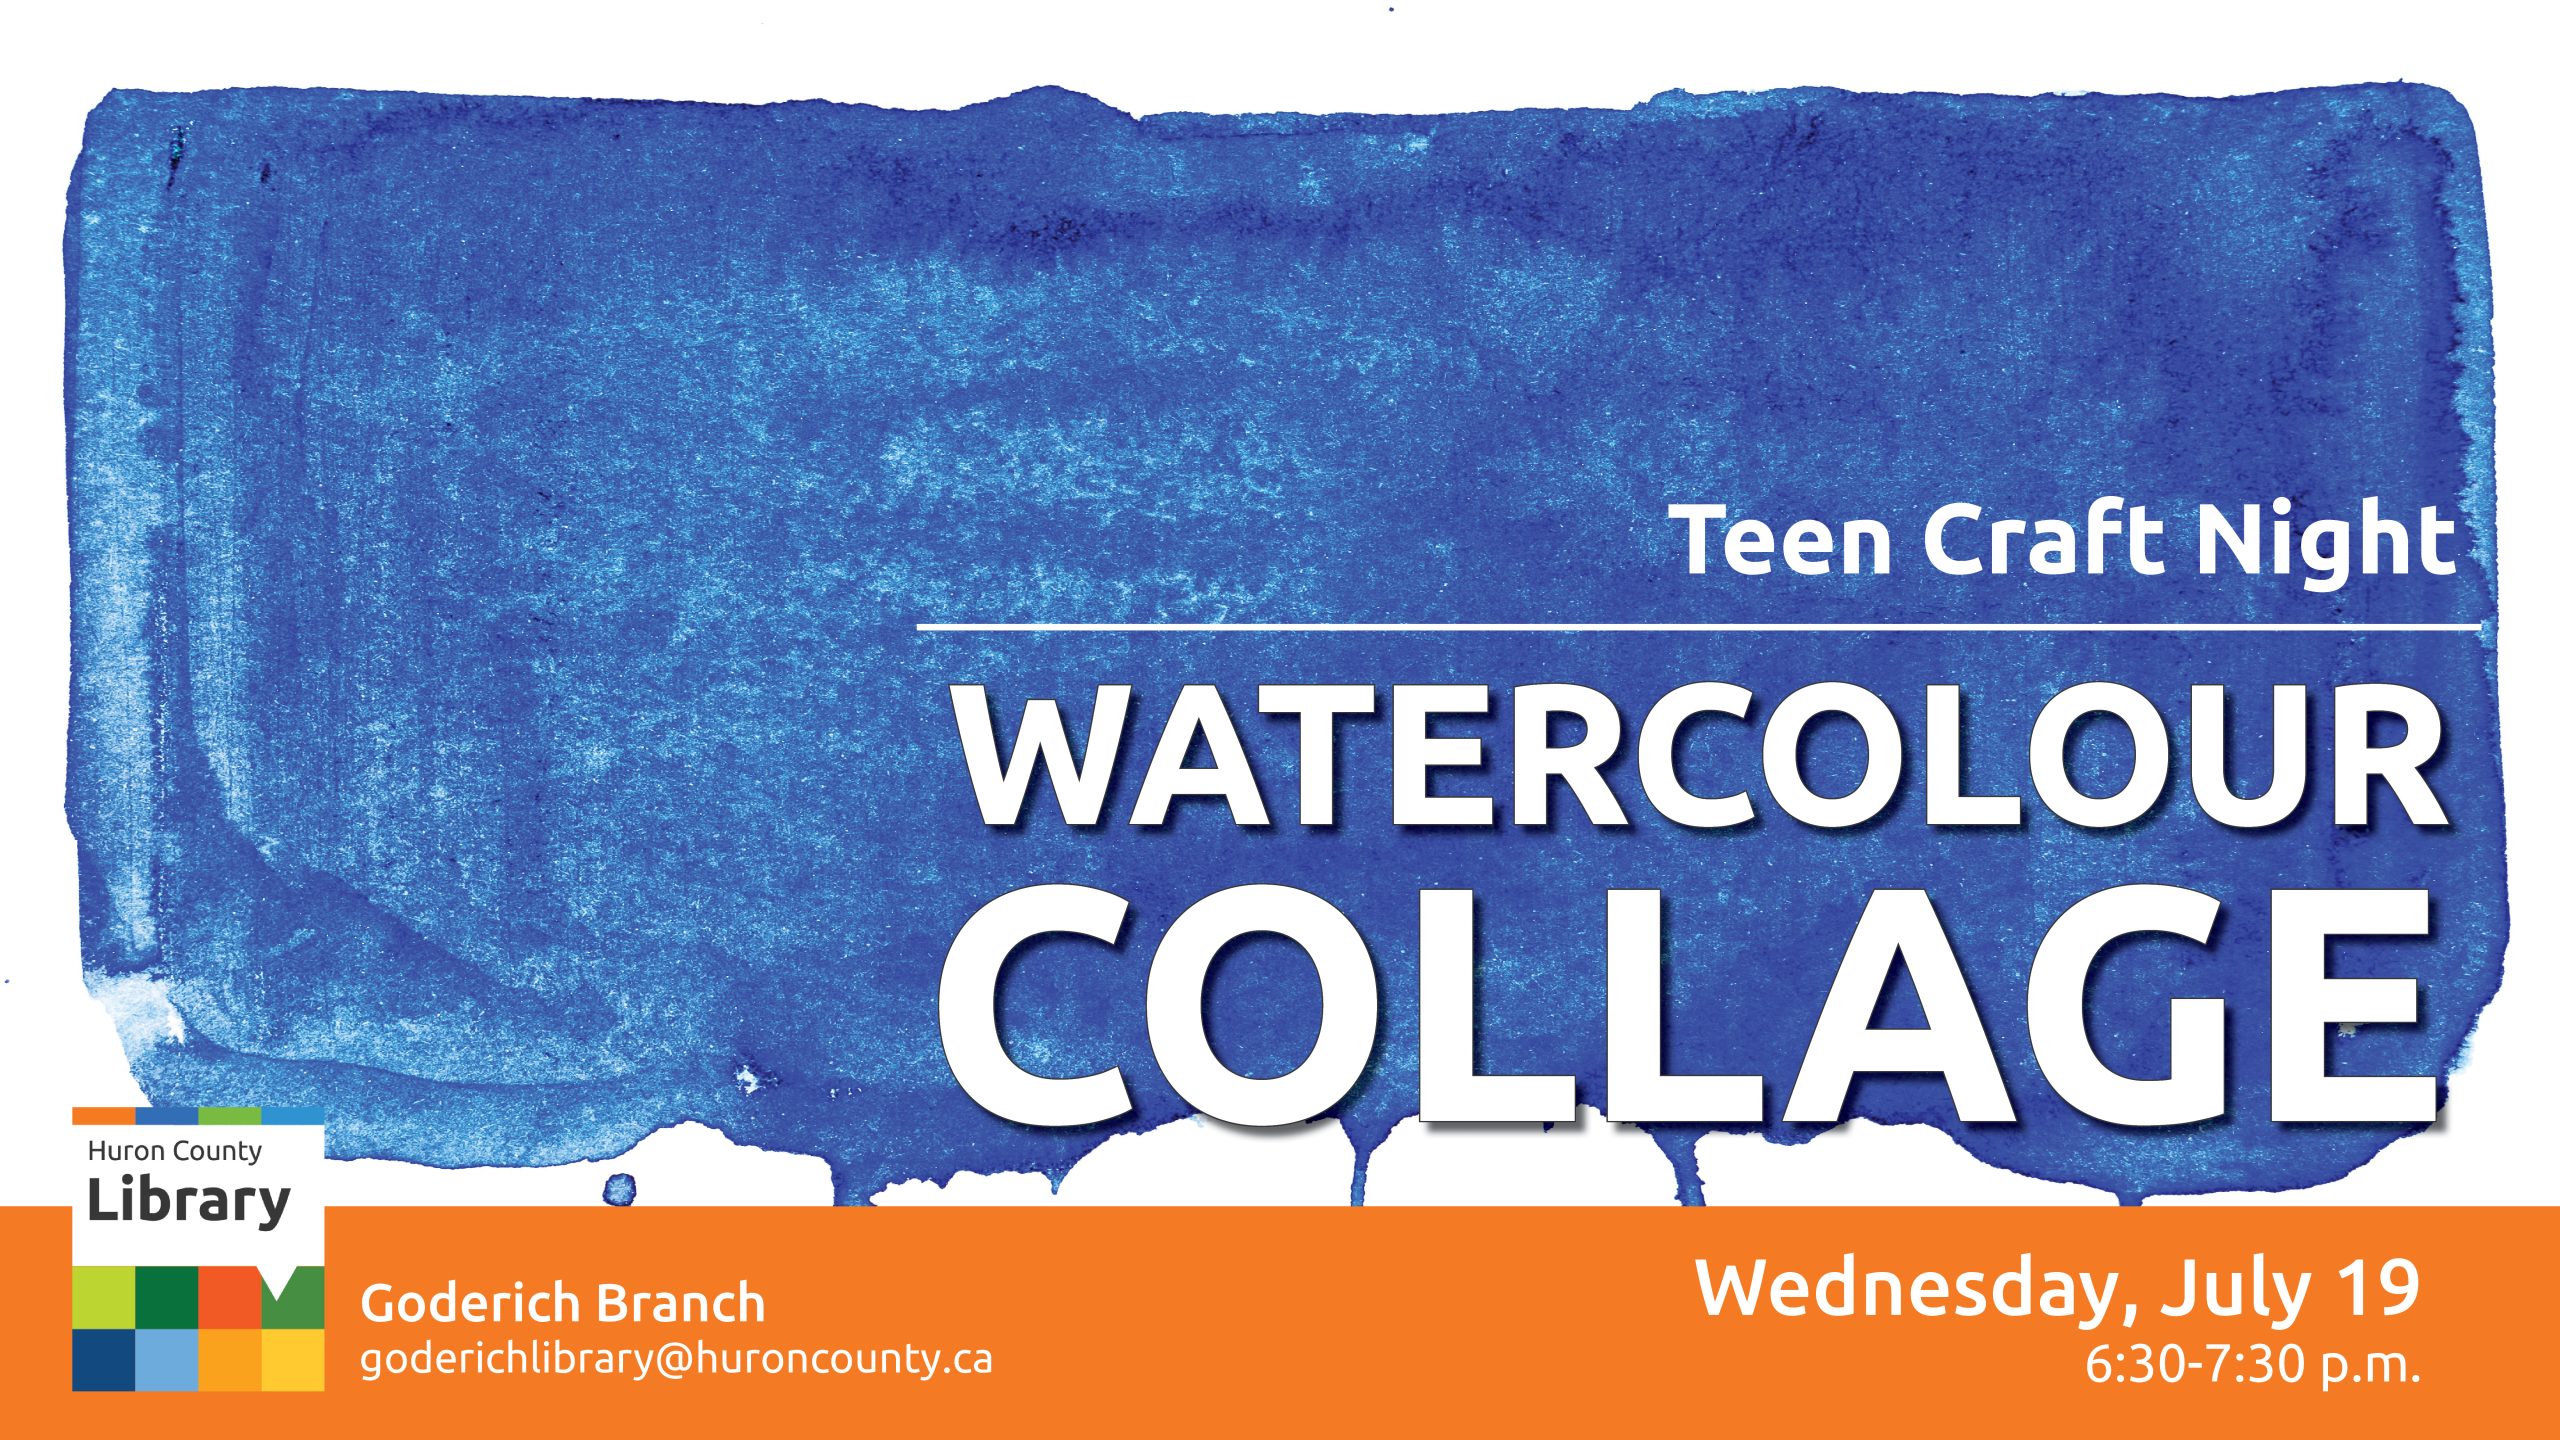 Image of a blue watercolour painting with text promoting Watercolour Collage program for teens at Goderich Branch